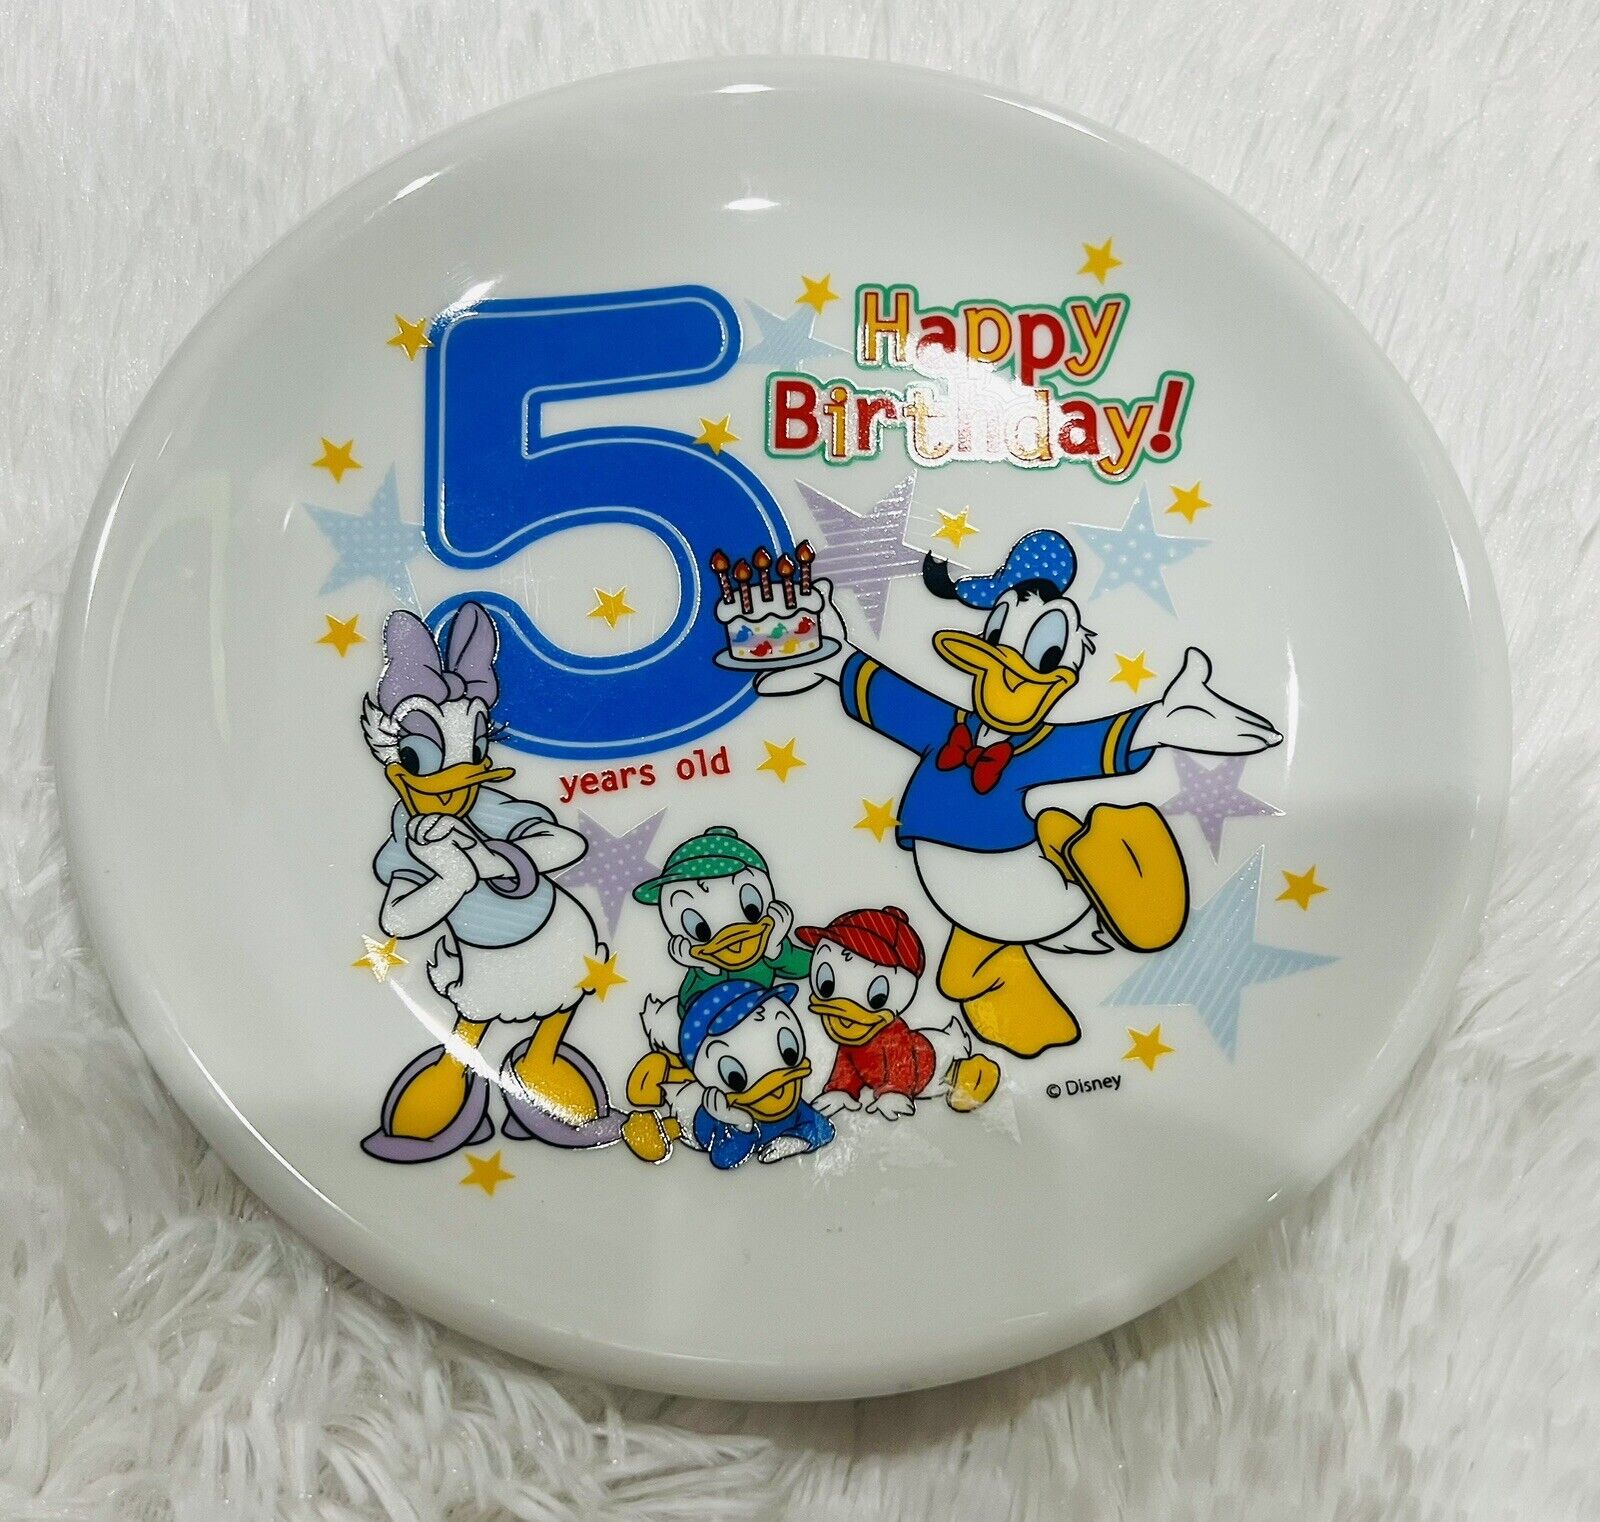 Disney Birthday Plate 5 Year Old, Donald Duck And Daisy Duck